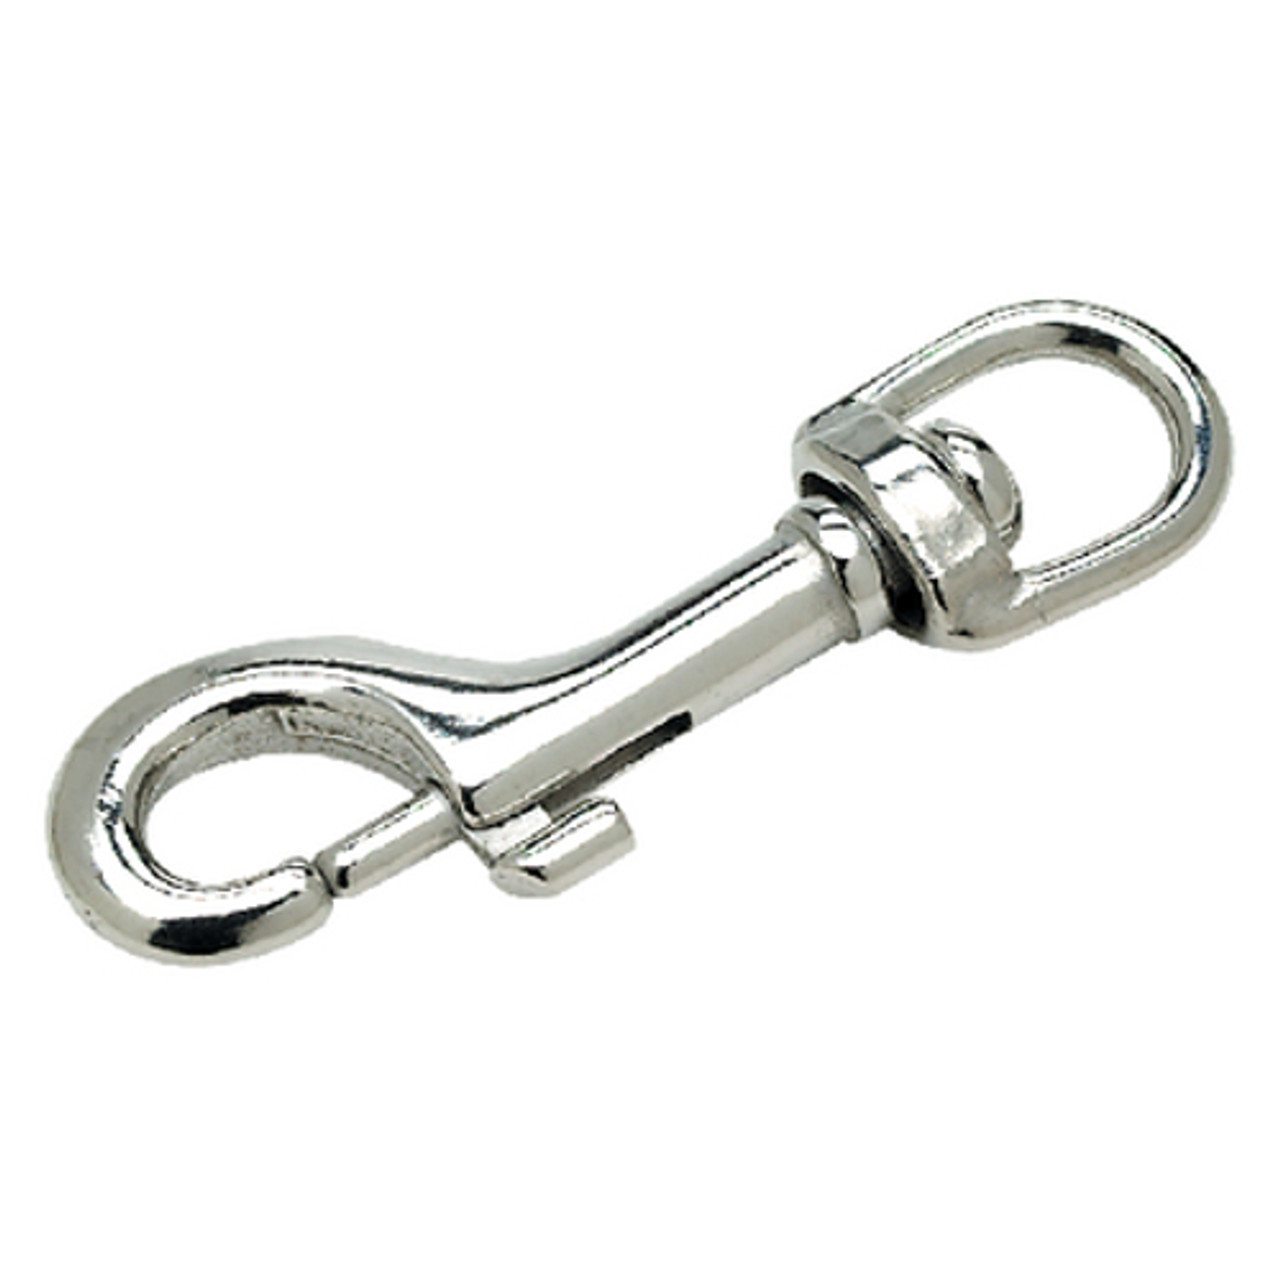 3 Inch Stainless Steel Swivel Eye Bolt Snap for Boats